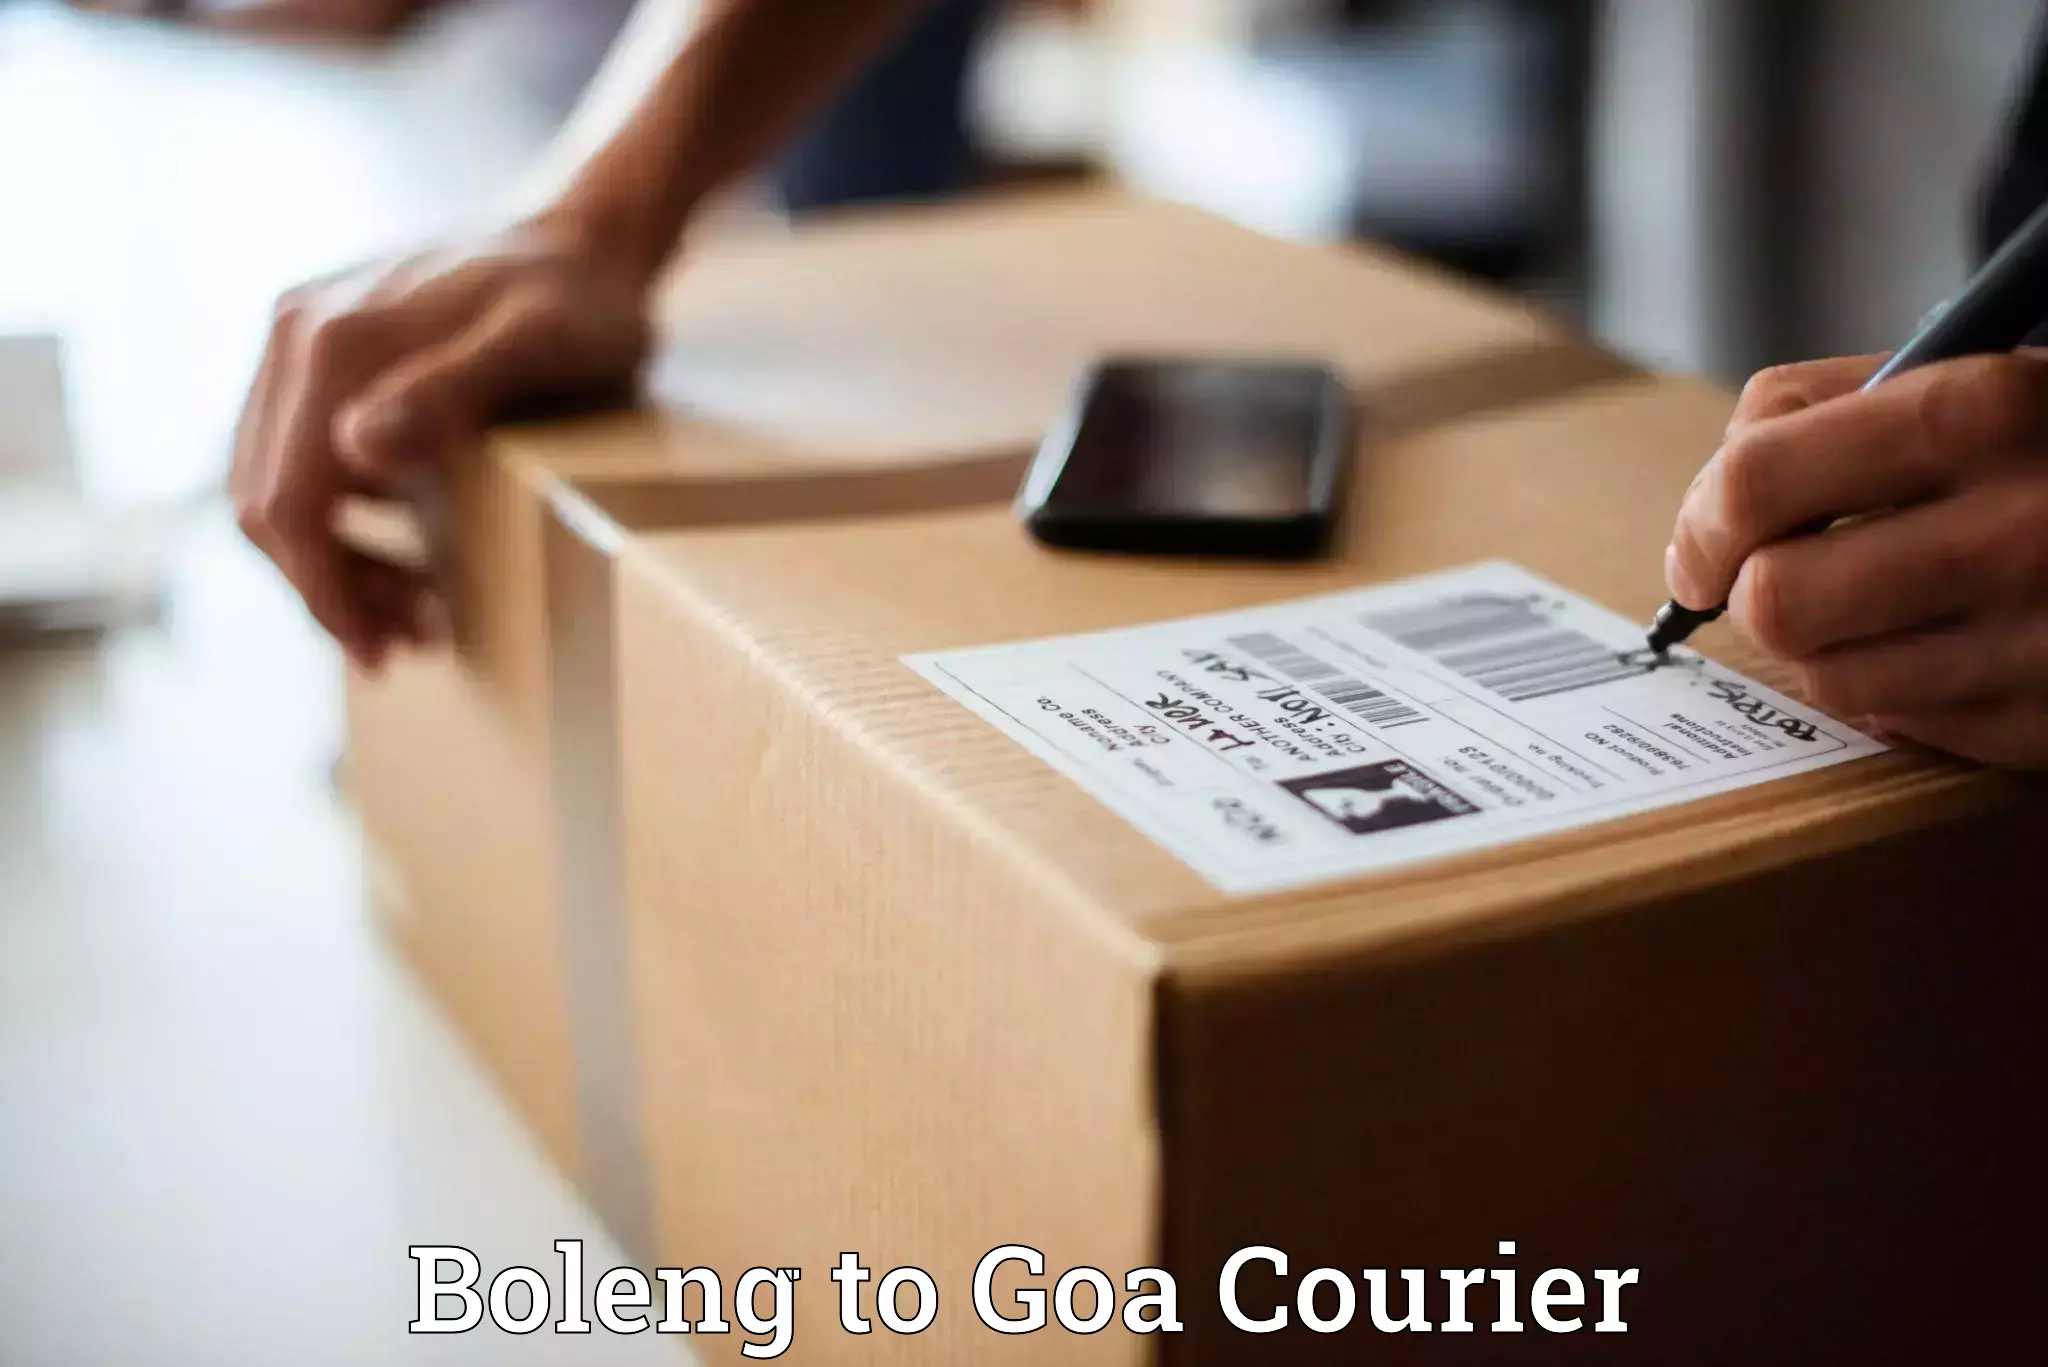 Optimized delivery routes Boleng to Goa